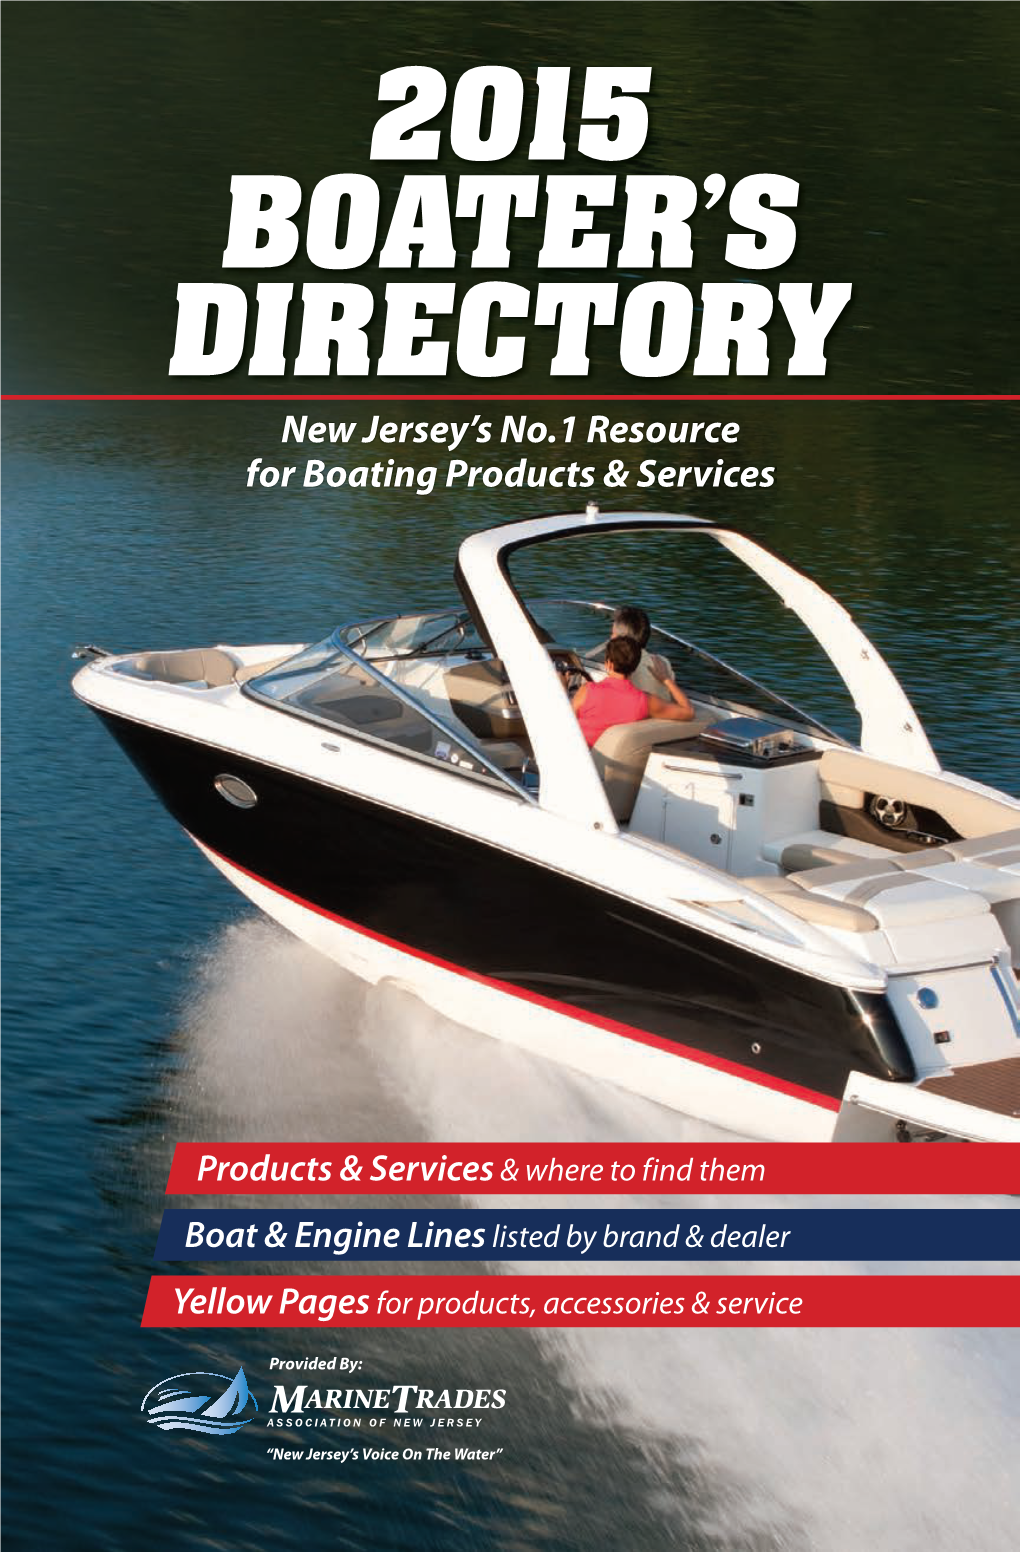 New Jersey's No.1 Resource for Boating Products & Services